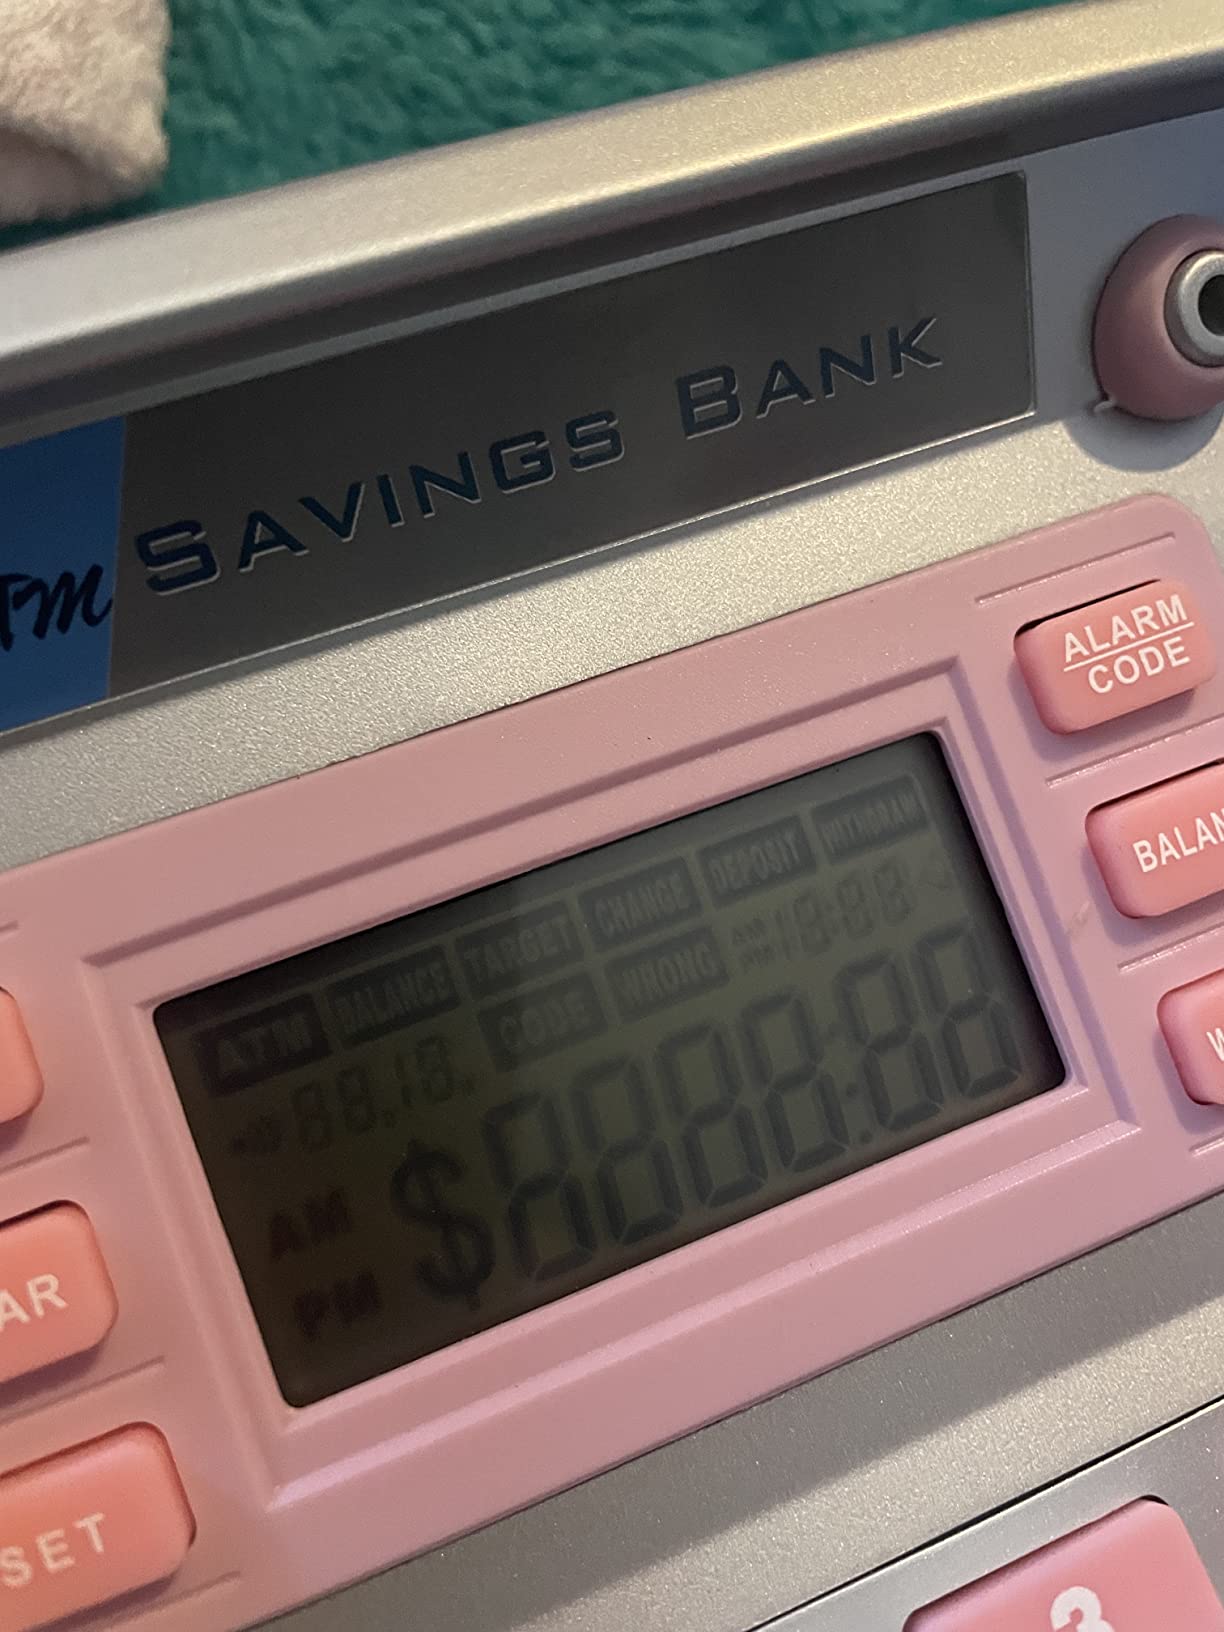 Talking Atm Savings Bank For Kids photo review